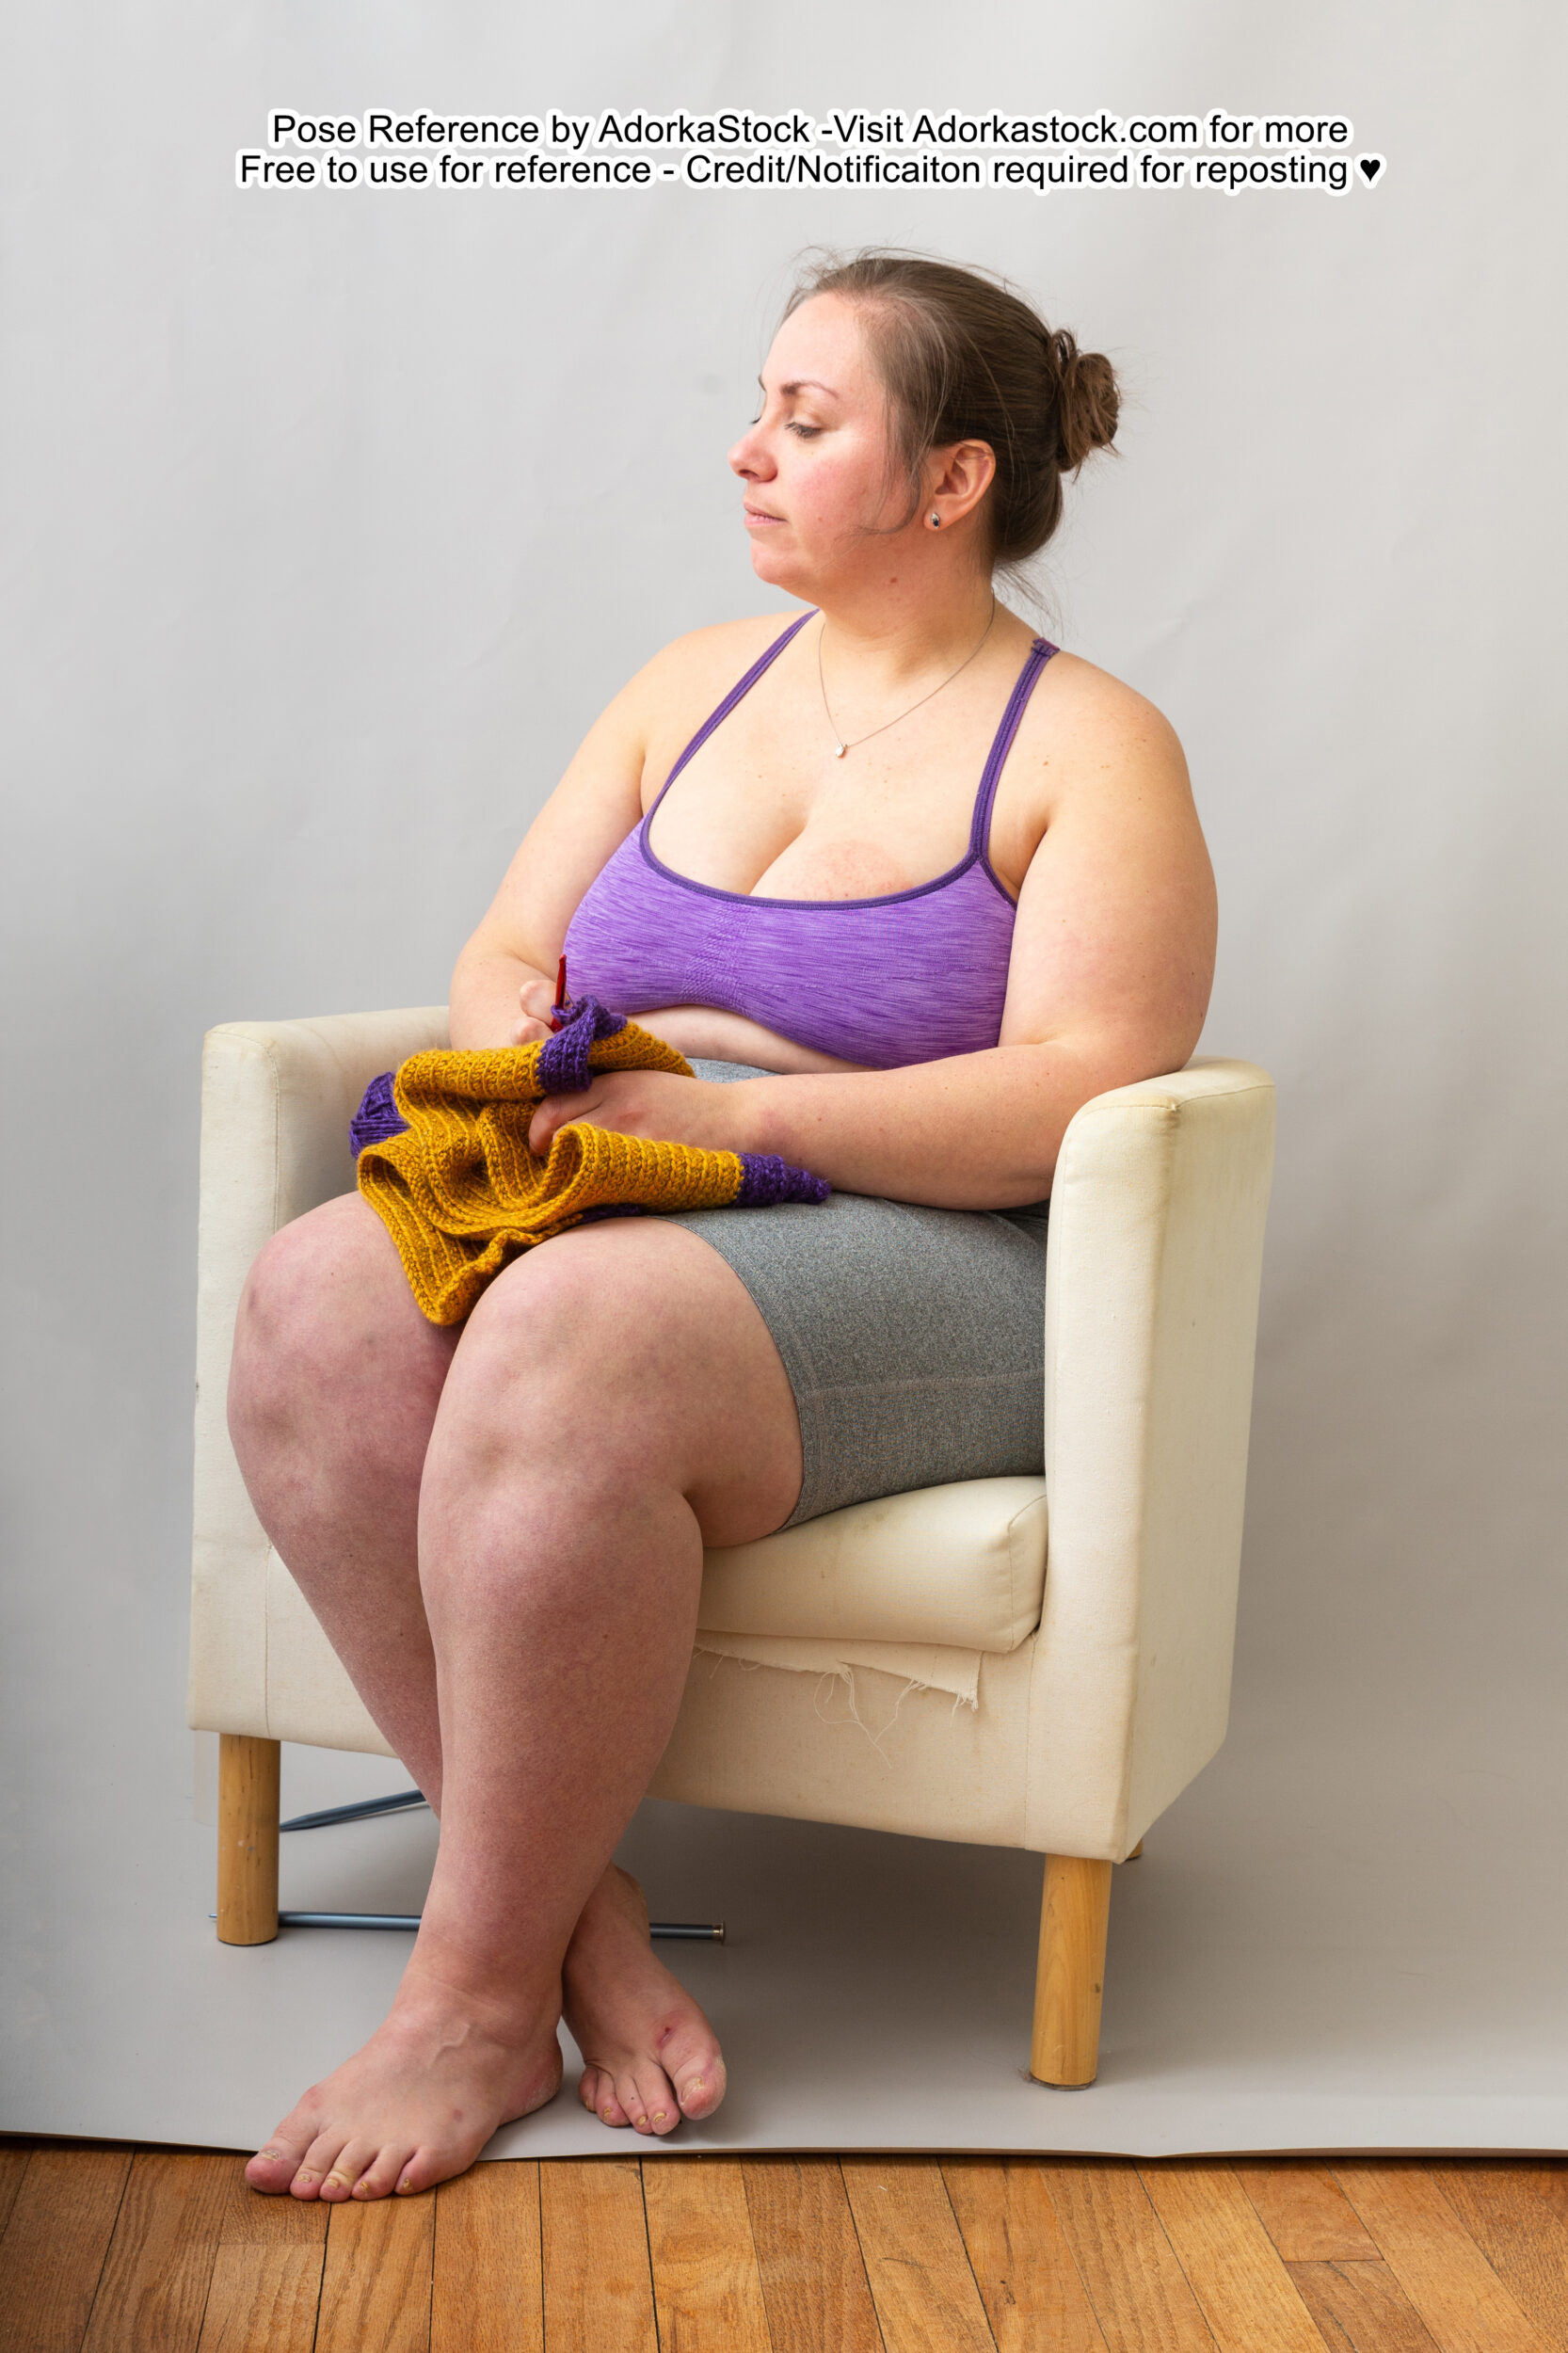 fat, white, female pose reference model in profile sitting pose with an unfinished knitting project in her lap